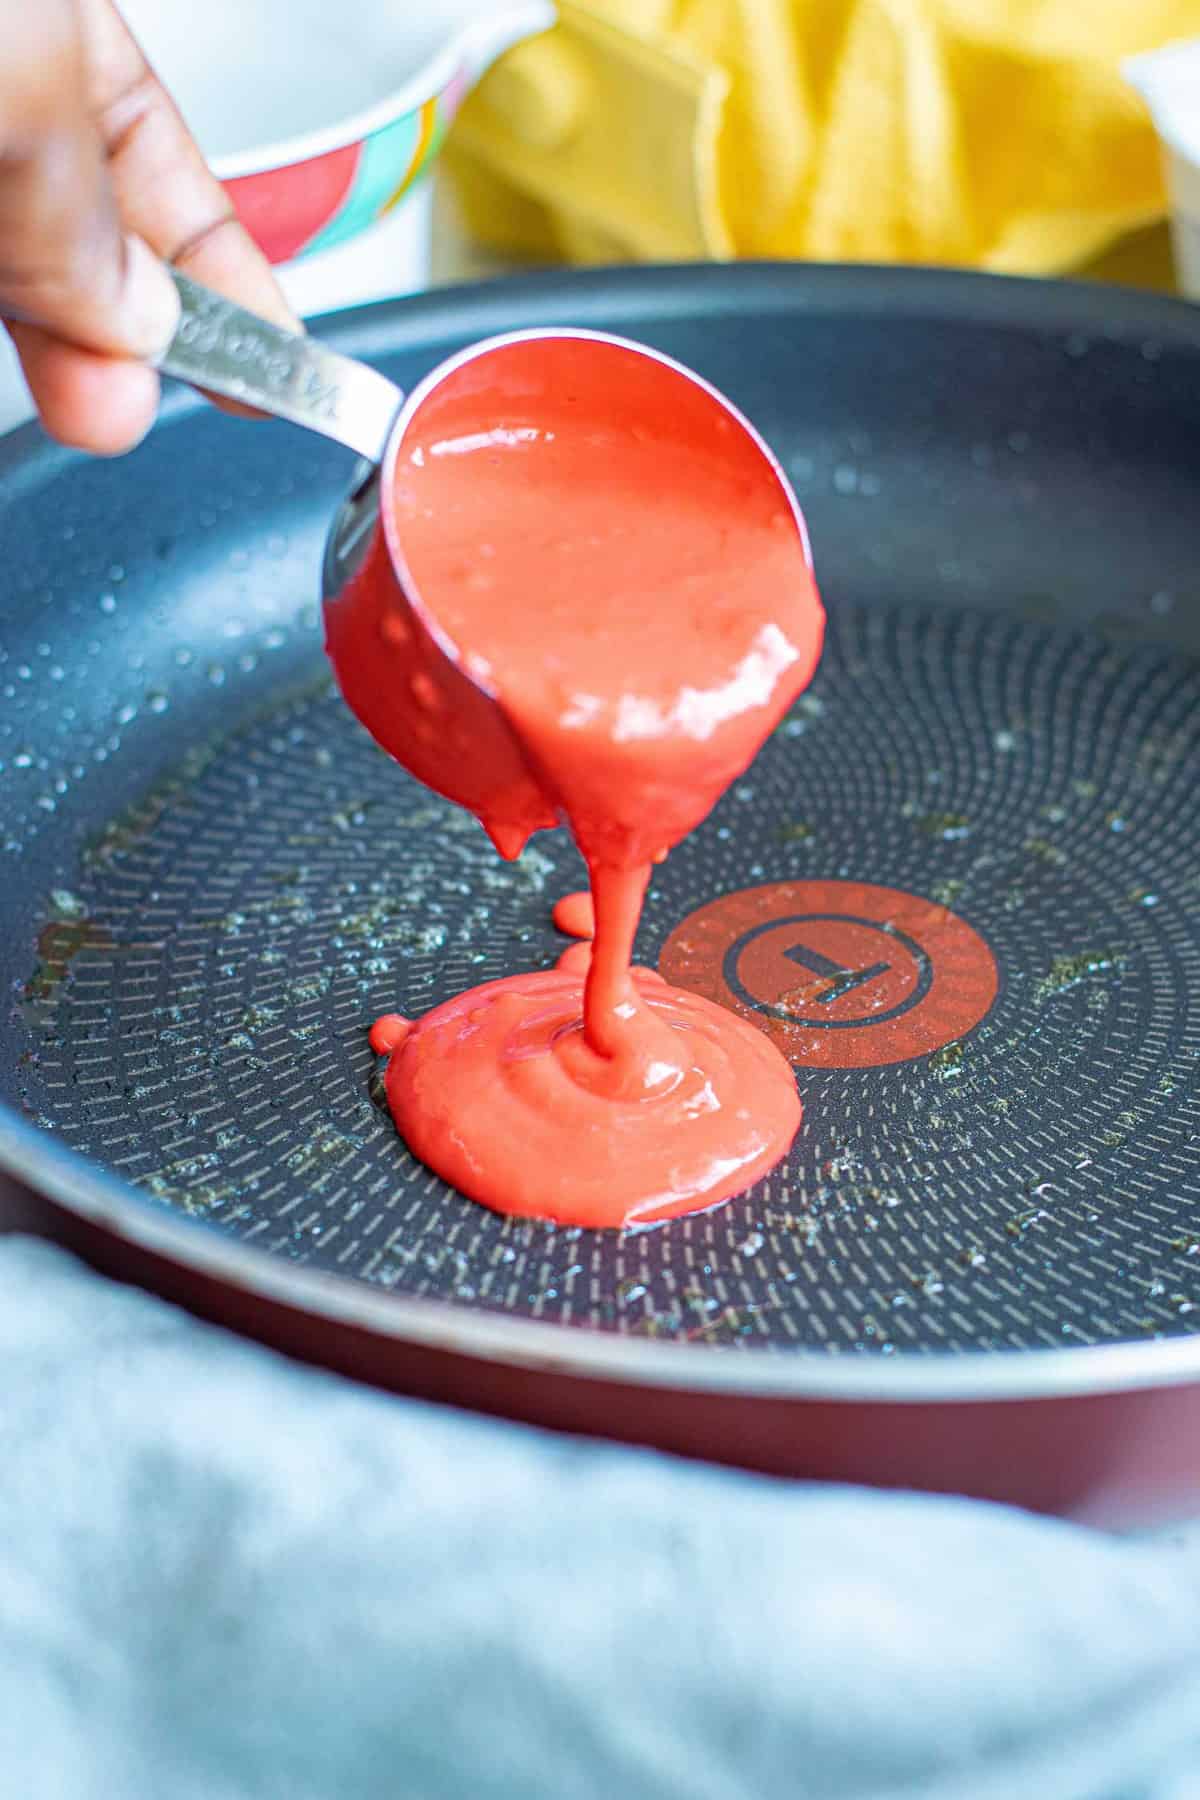 Red batter being poured onto a pan.